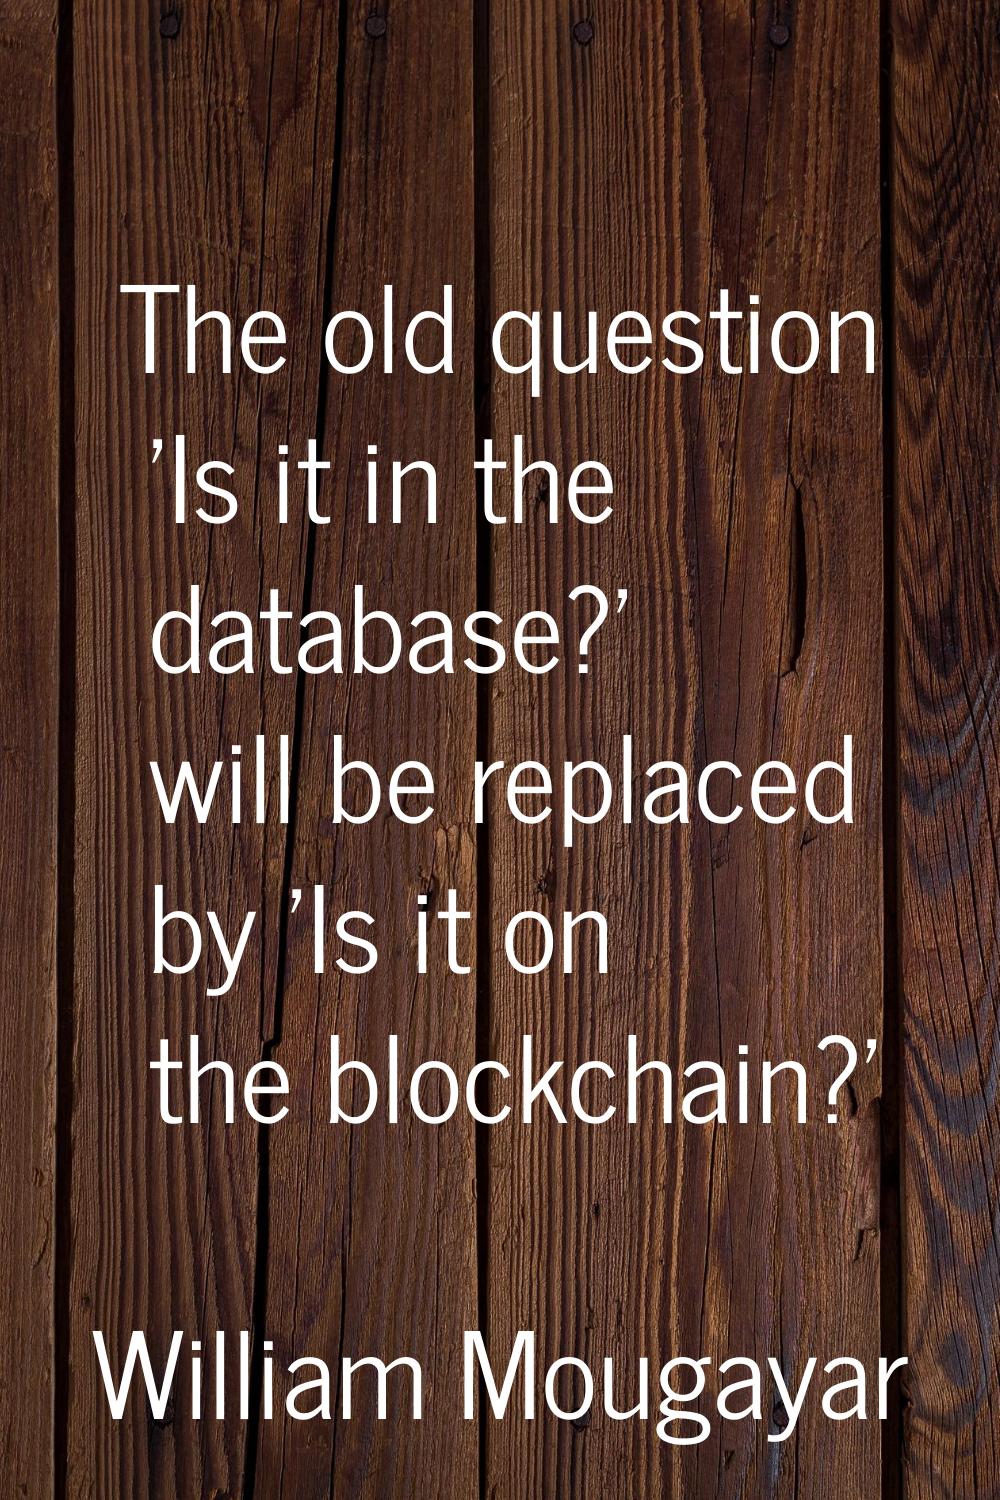 The old question 'Is it in the database?' will be replaced by 'Is it on the blockchain?'